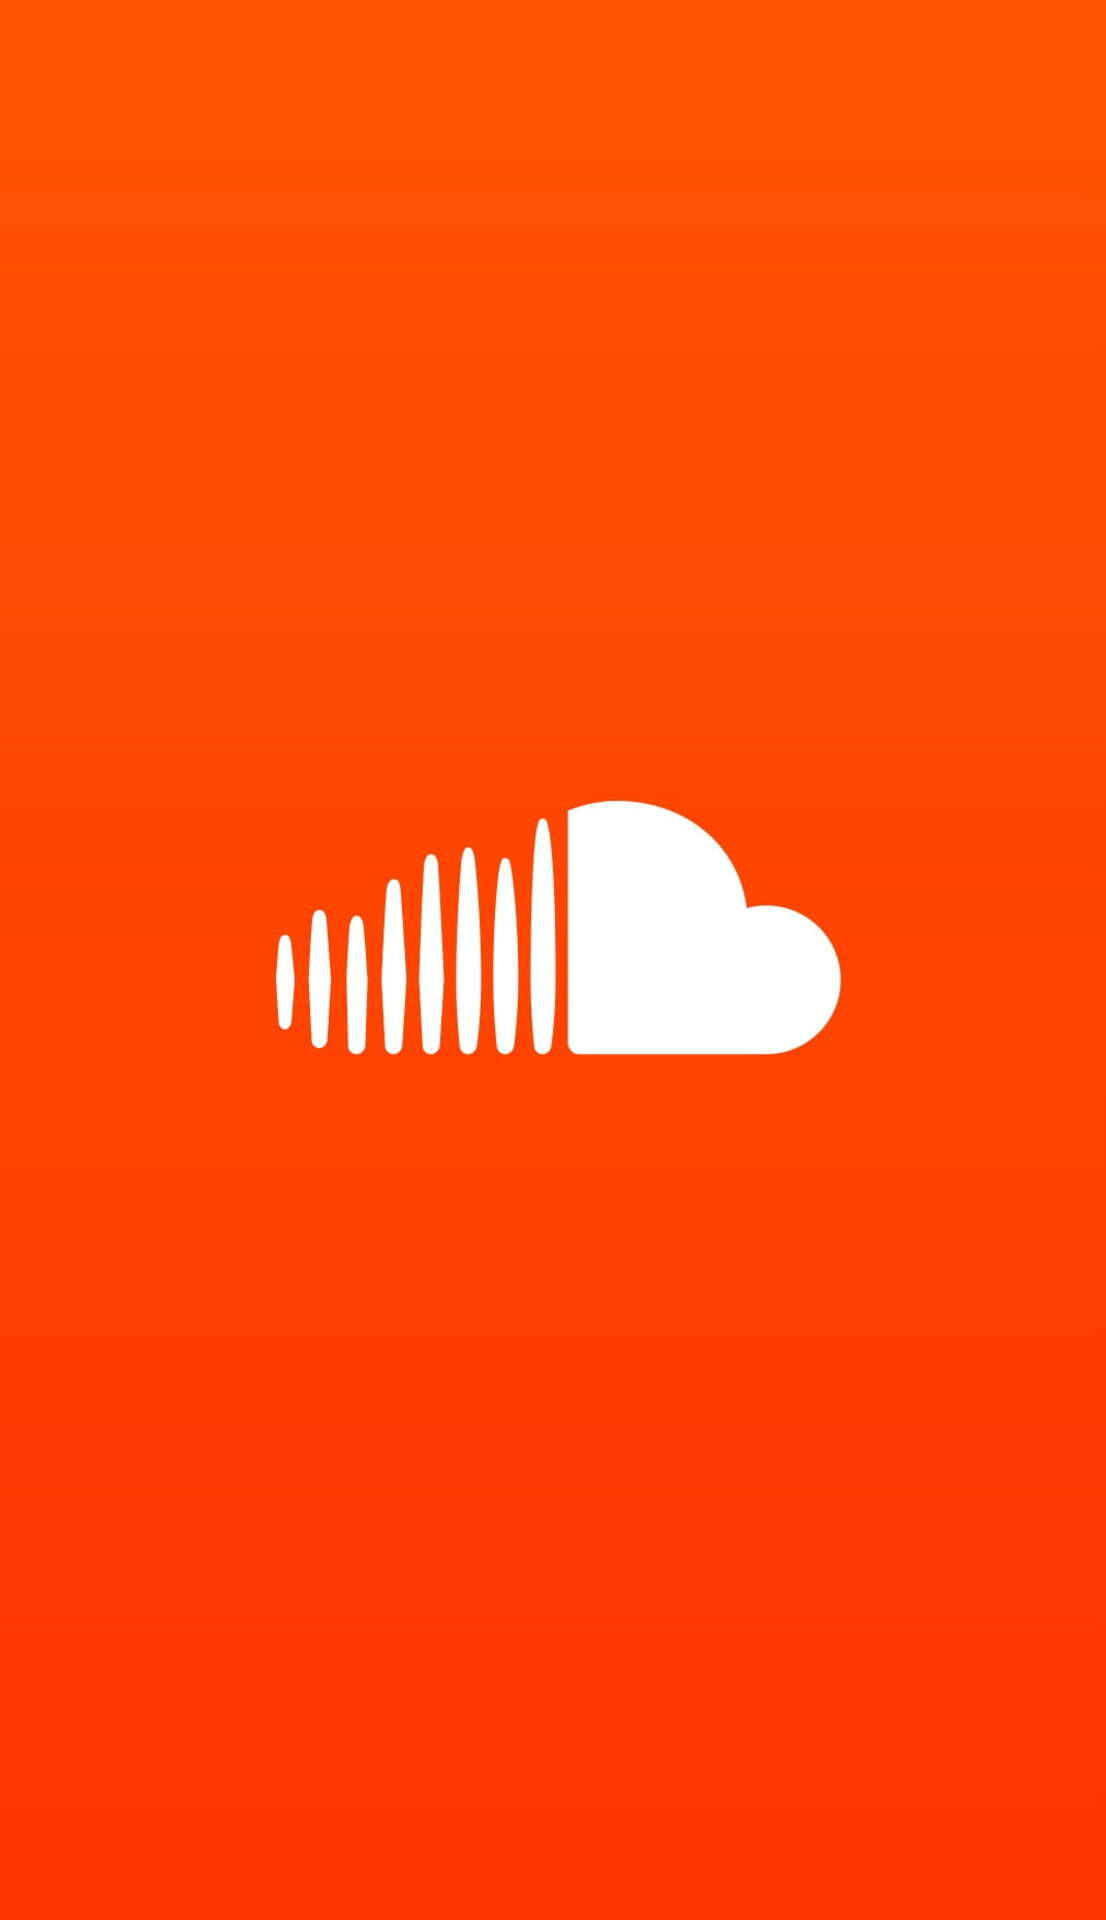 SoundCloud music sharing icon wallpaper